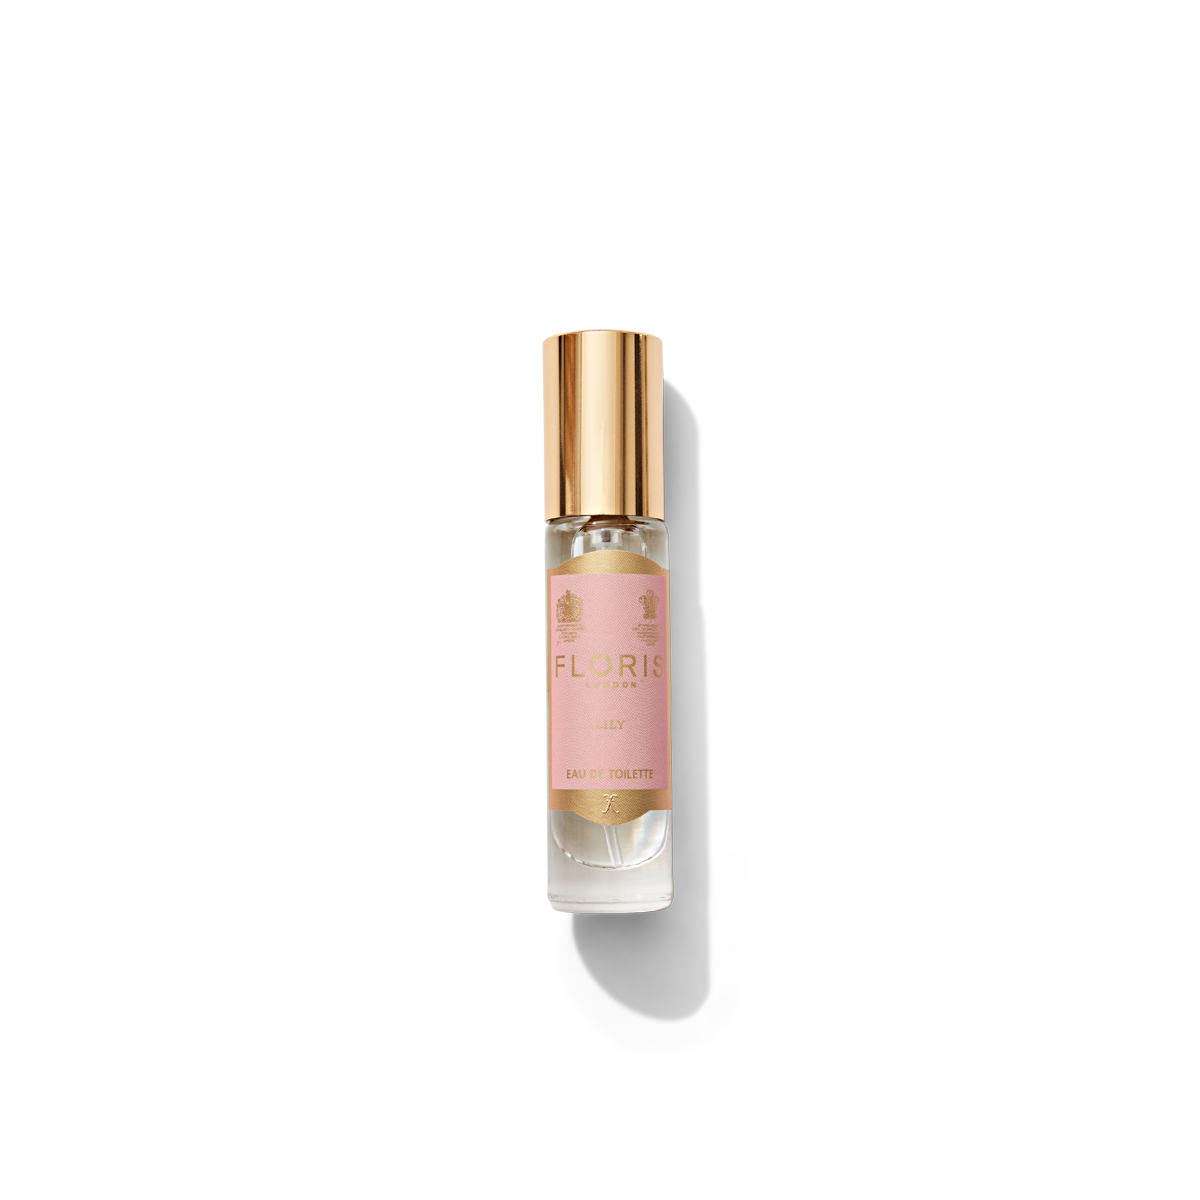 Lily Eau de Toilette in small round glass bottle with light pink and gold label 